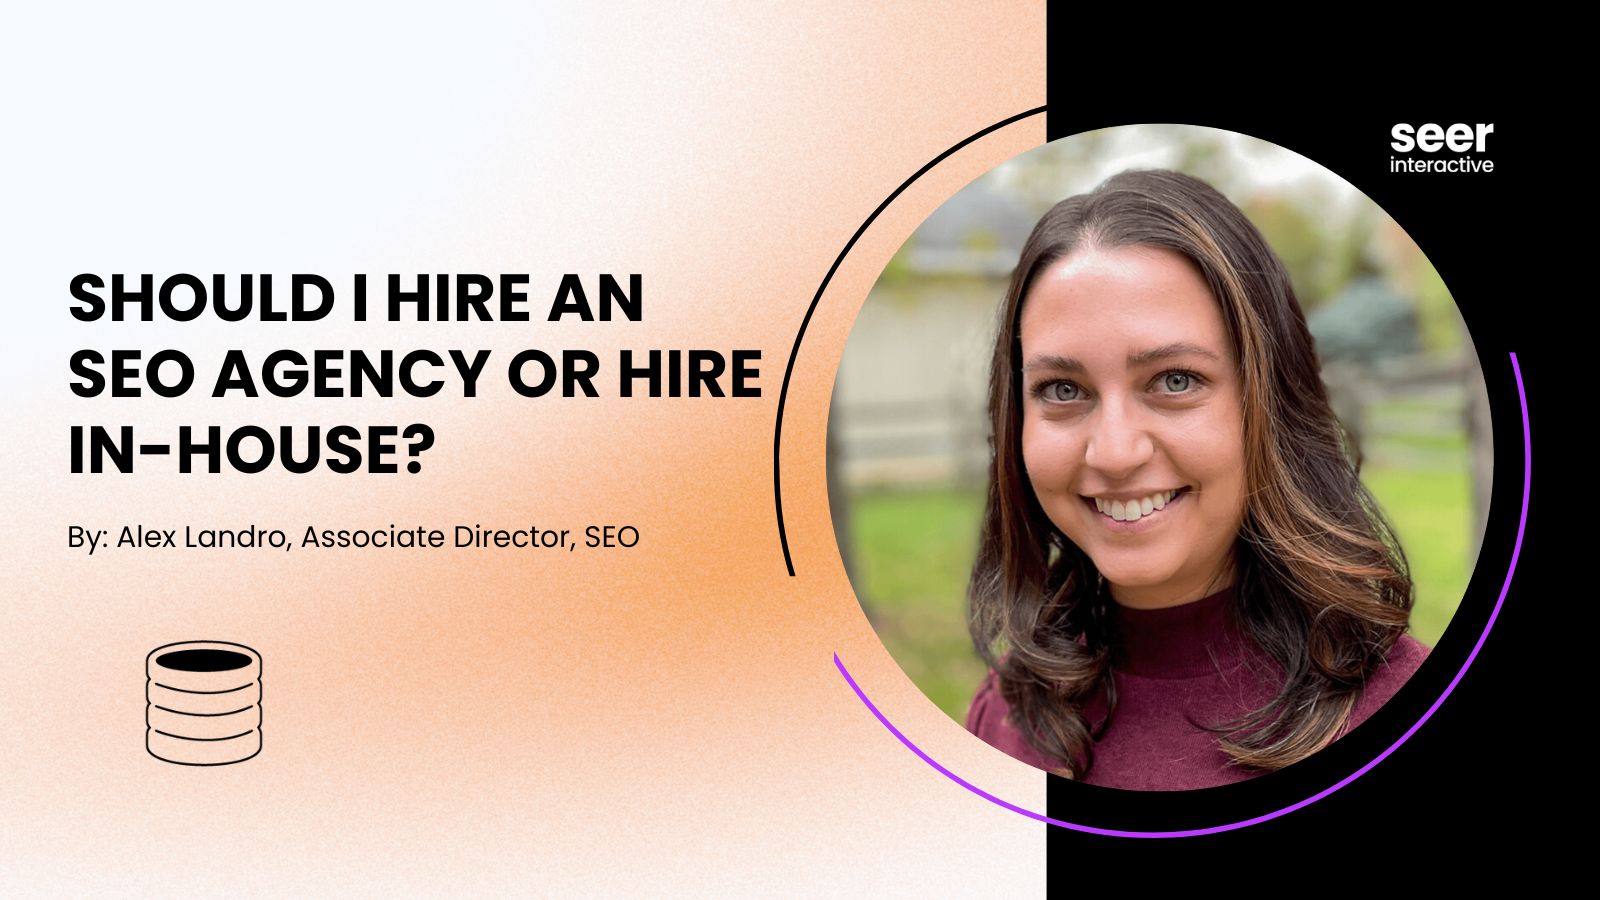 Should I Hire an SEO Agency or Hire In-House?